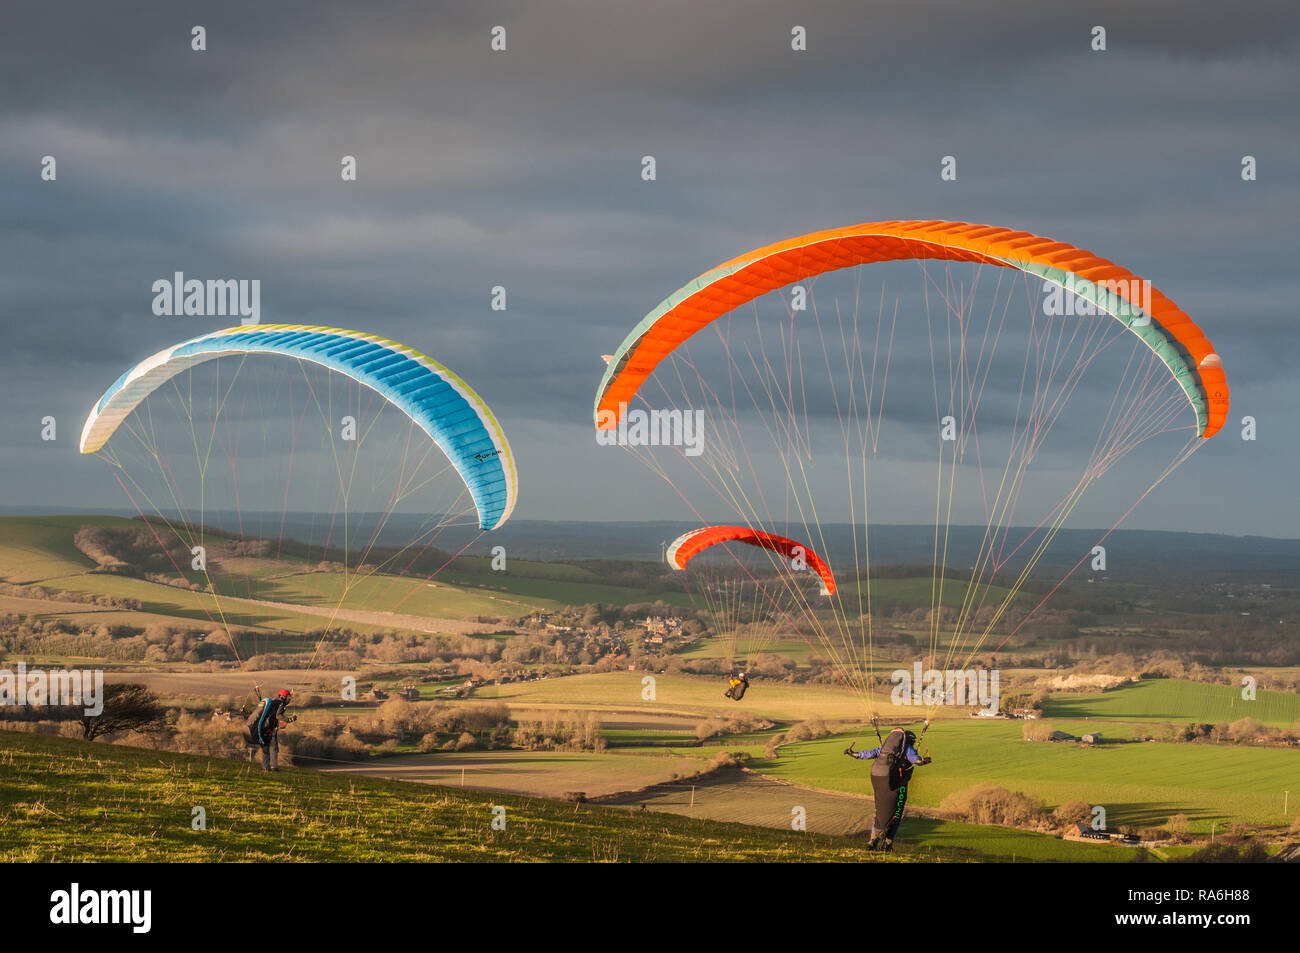 Firle, Lewes, East Sussex, UK. 2nd January 2019. Northerly wind brings paraglider pilots to Firle Beacon in the beautiful South Downs. Varying conditions throughout the day, flying continued to sunset.Credit: Alamy Live News Stock Photo